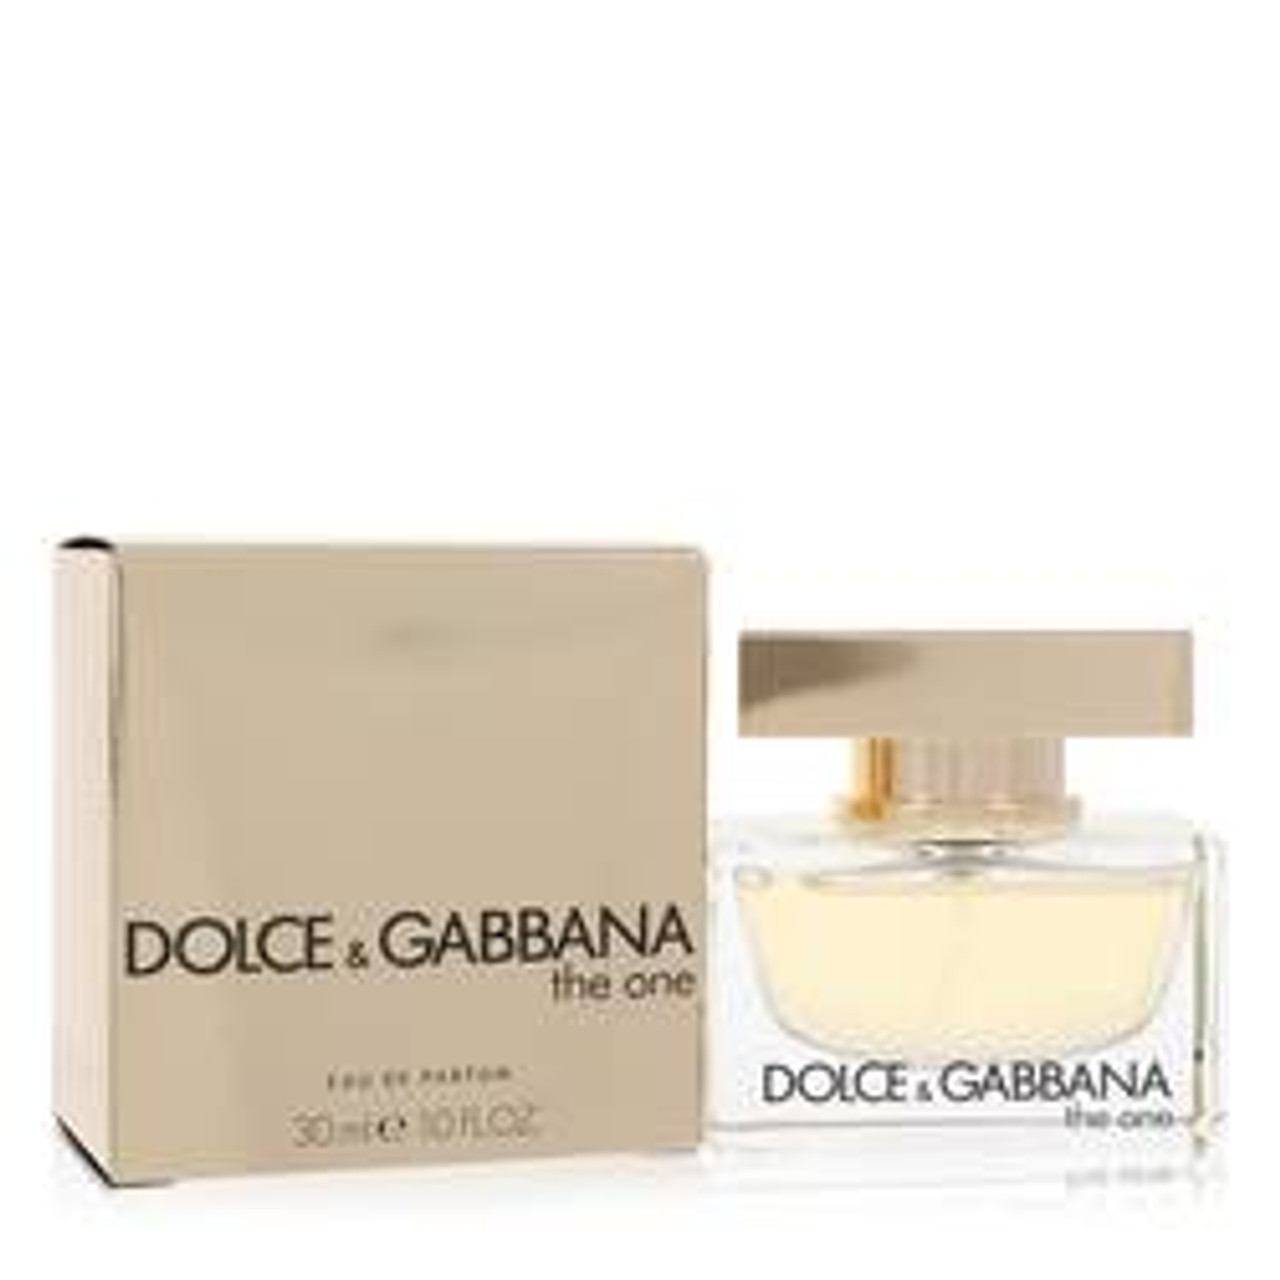 The One Perfume By Dolce & Gabbana Eau De Parfum Spray 1 oz for Women - [From 128.00 - Choose pk Qty ] - *Ships from Miami